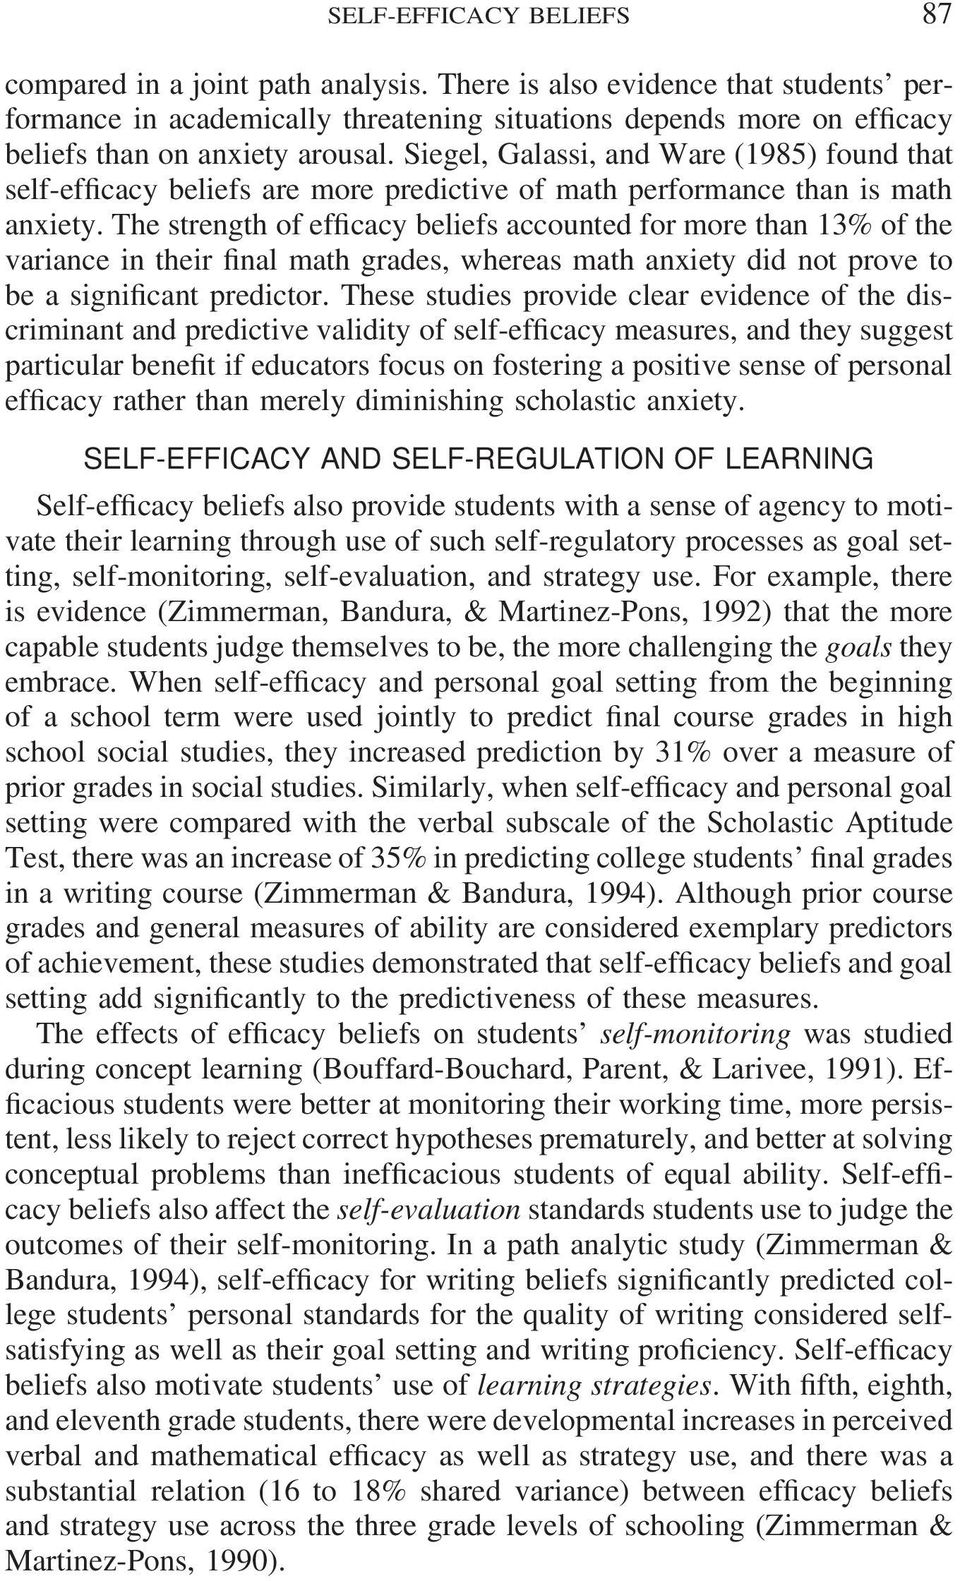 Siegel, Galassi, and Ware (1985) found that self-efficacy beliefs are more predictive of math performance than is math anxiety.